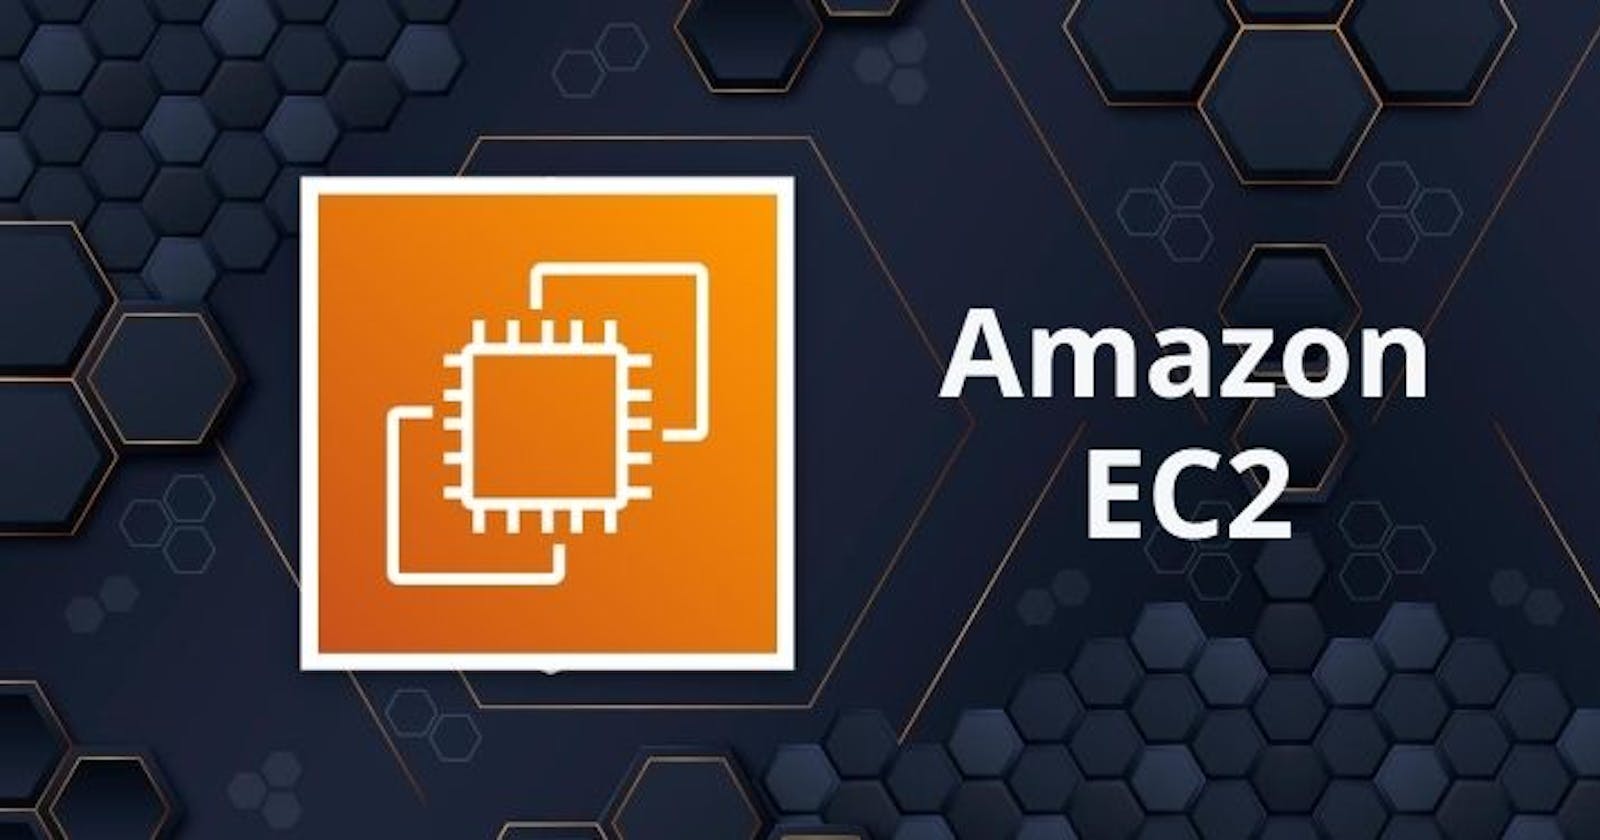 What is Amazon EC2 and why we use it?